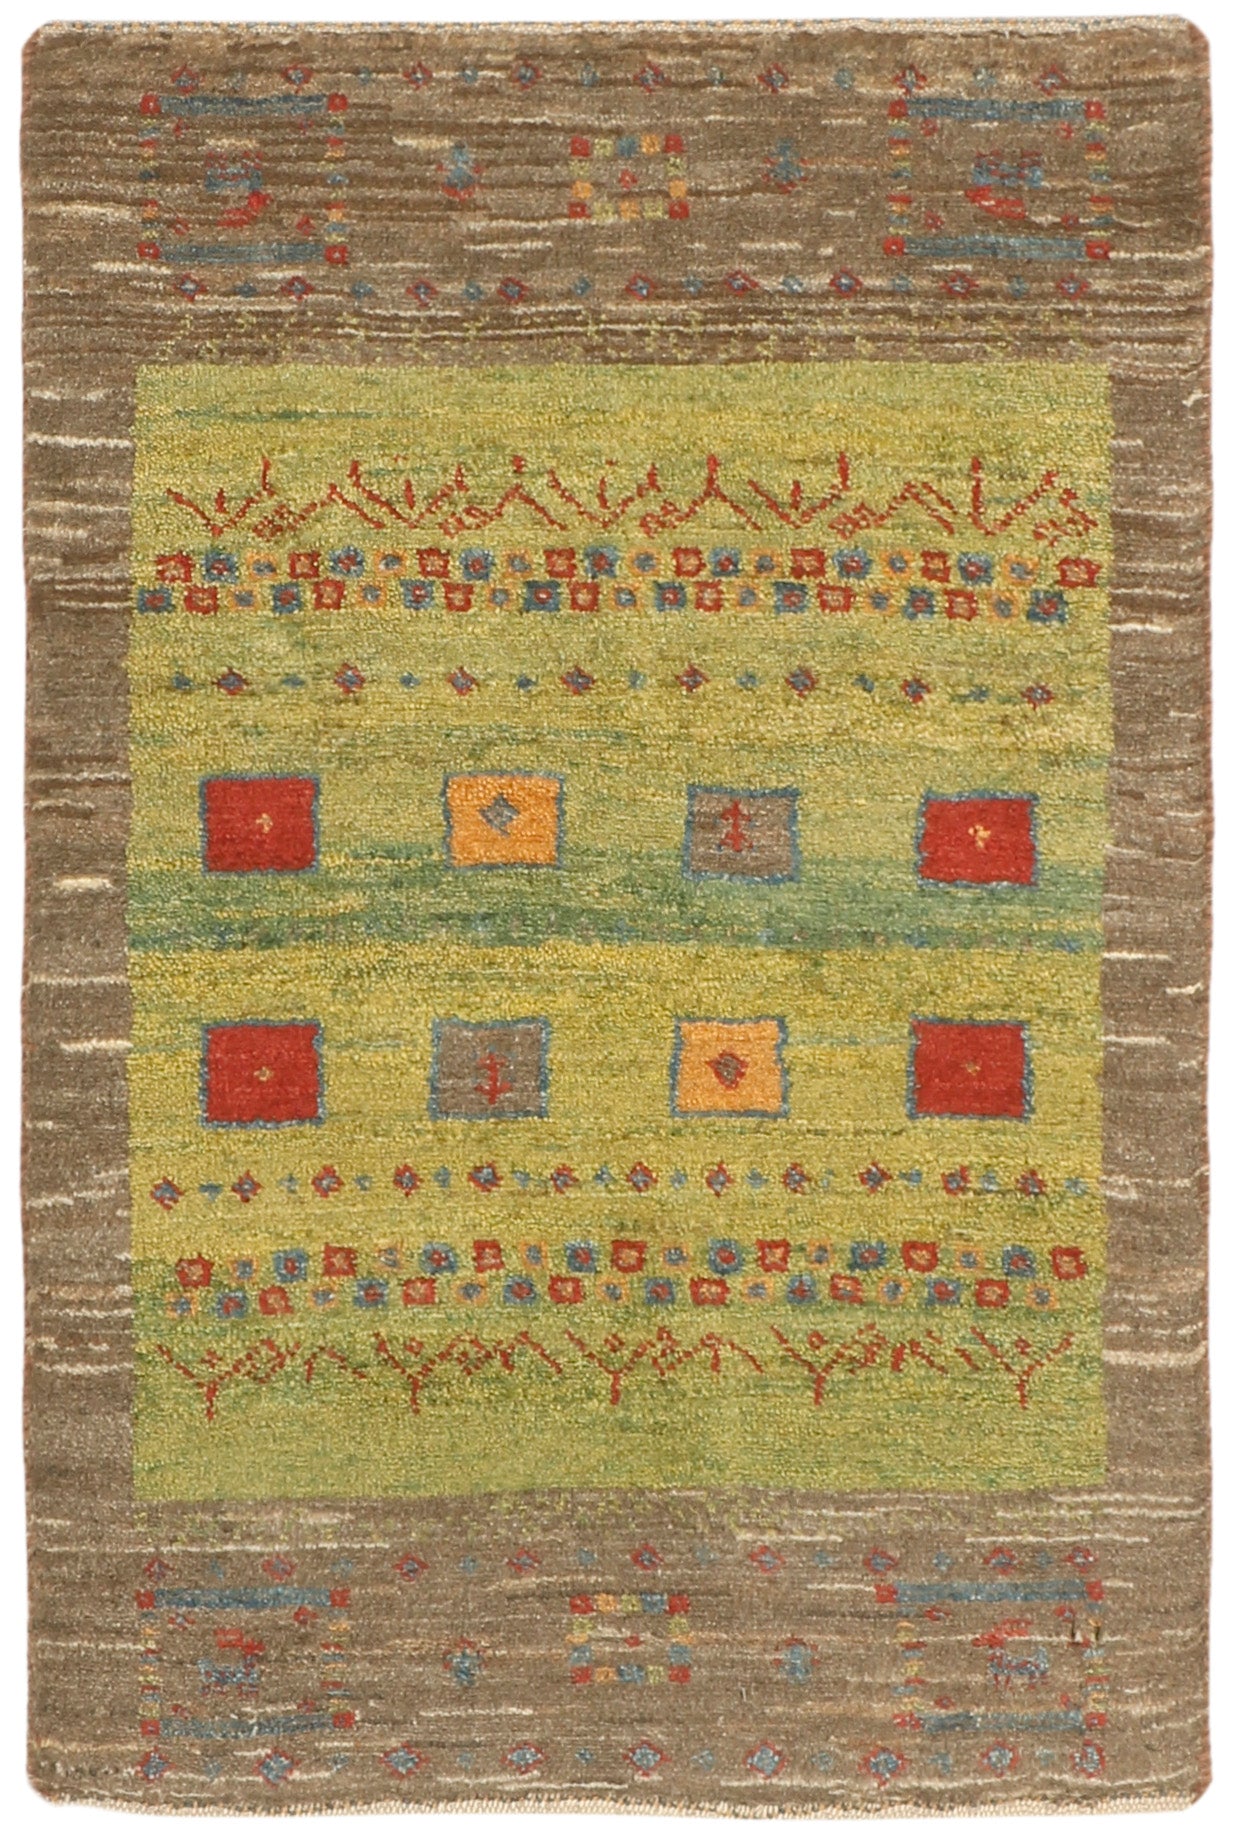 Authentic Persian wool rug with a multicolour geometric design